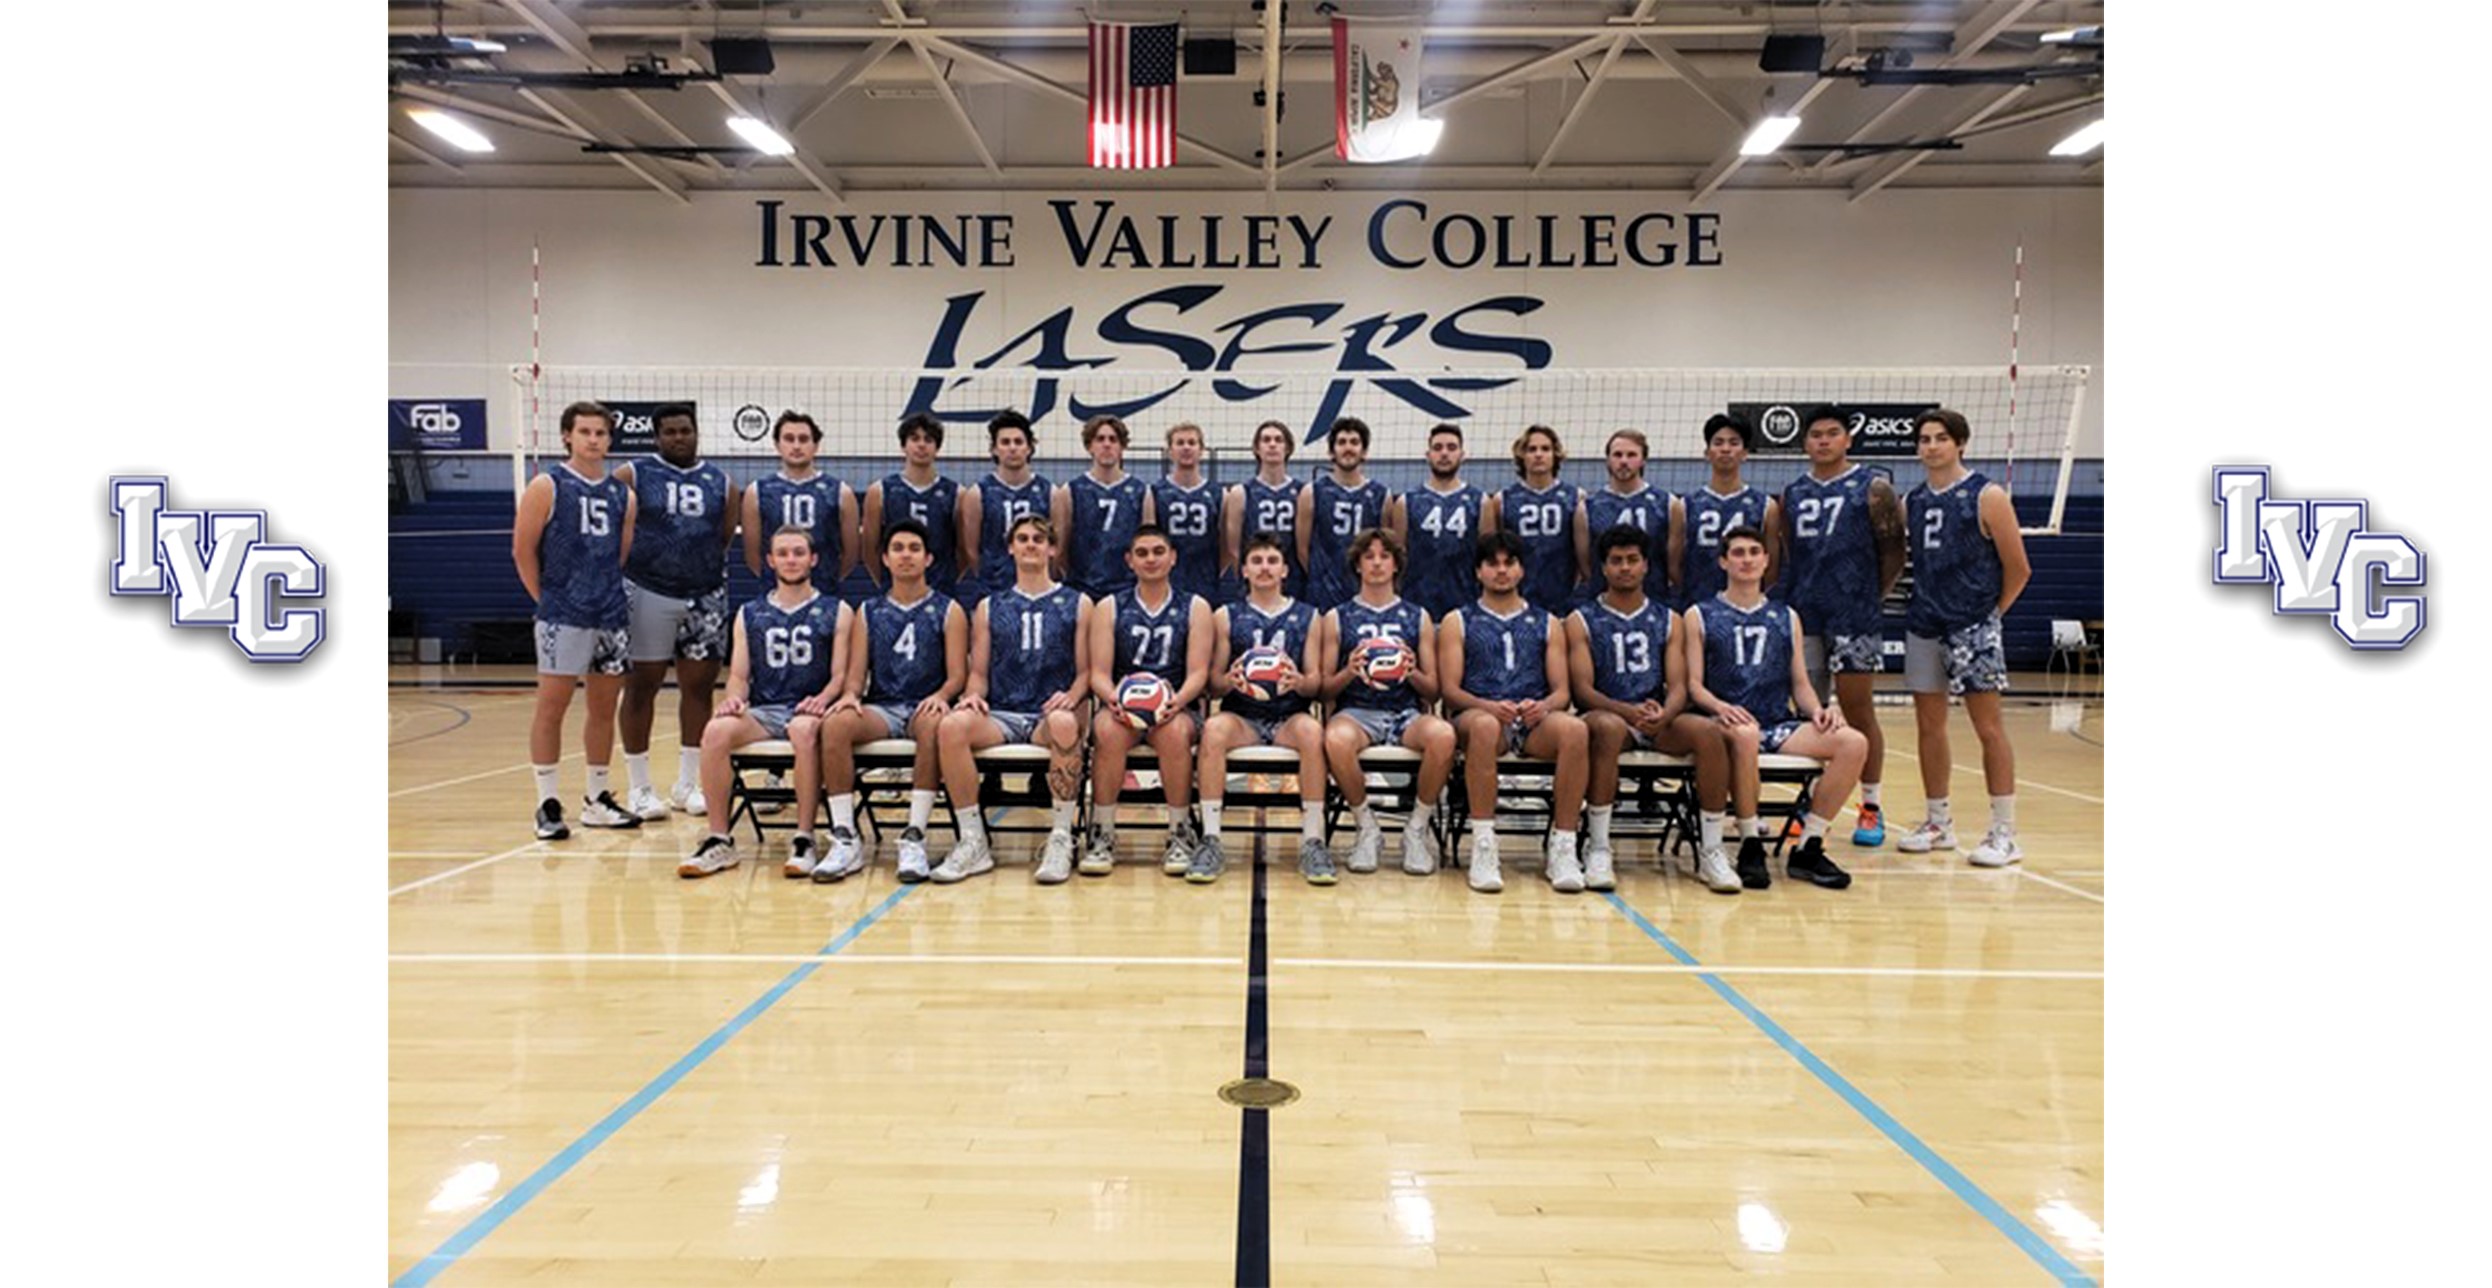 Men's volleyball is Irvine Valley's team of year for 2022-23